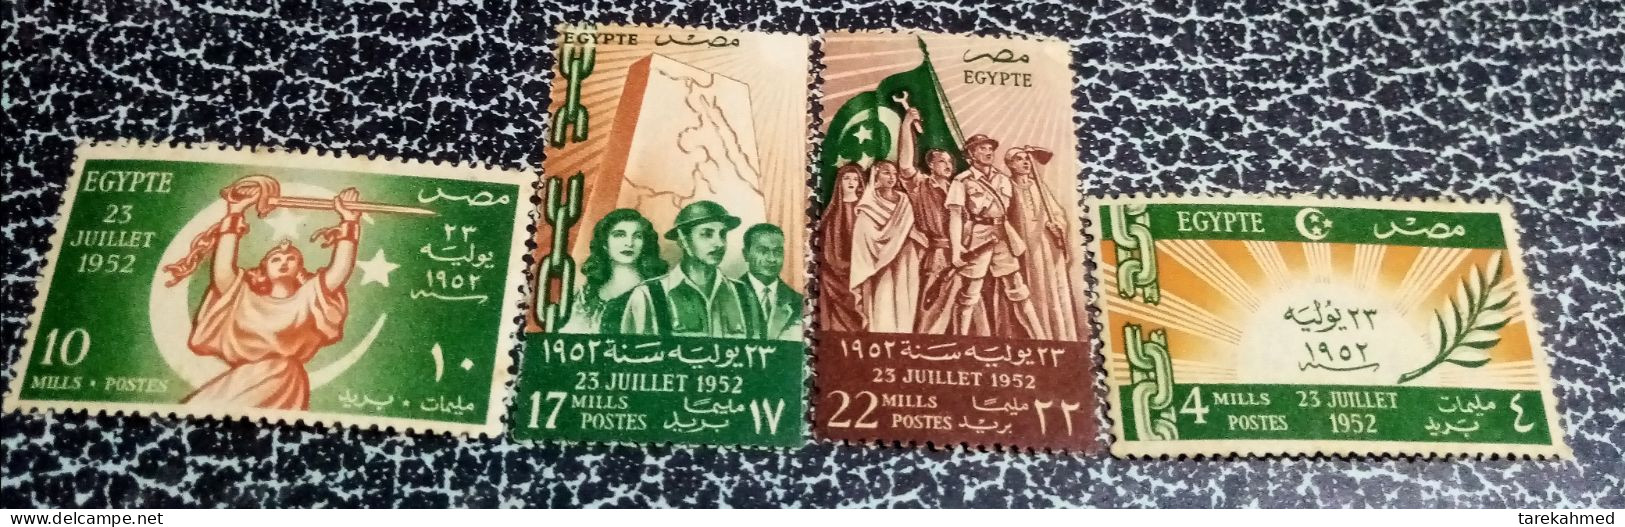 Egypt 1952 - Complete Set Of The Change Of Government, July 23 Revolution , 1952 )  - MNH - Neufs